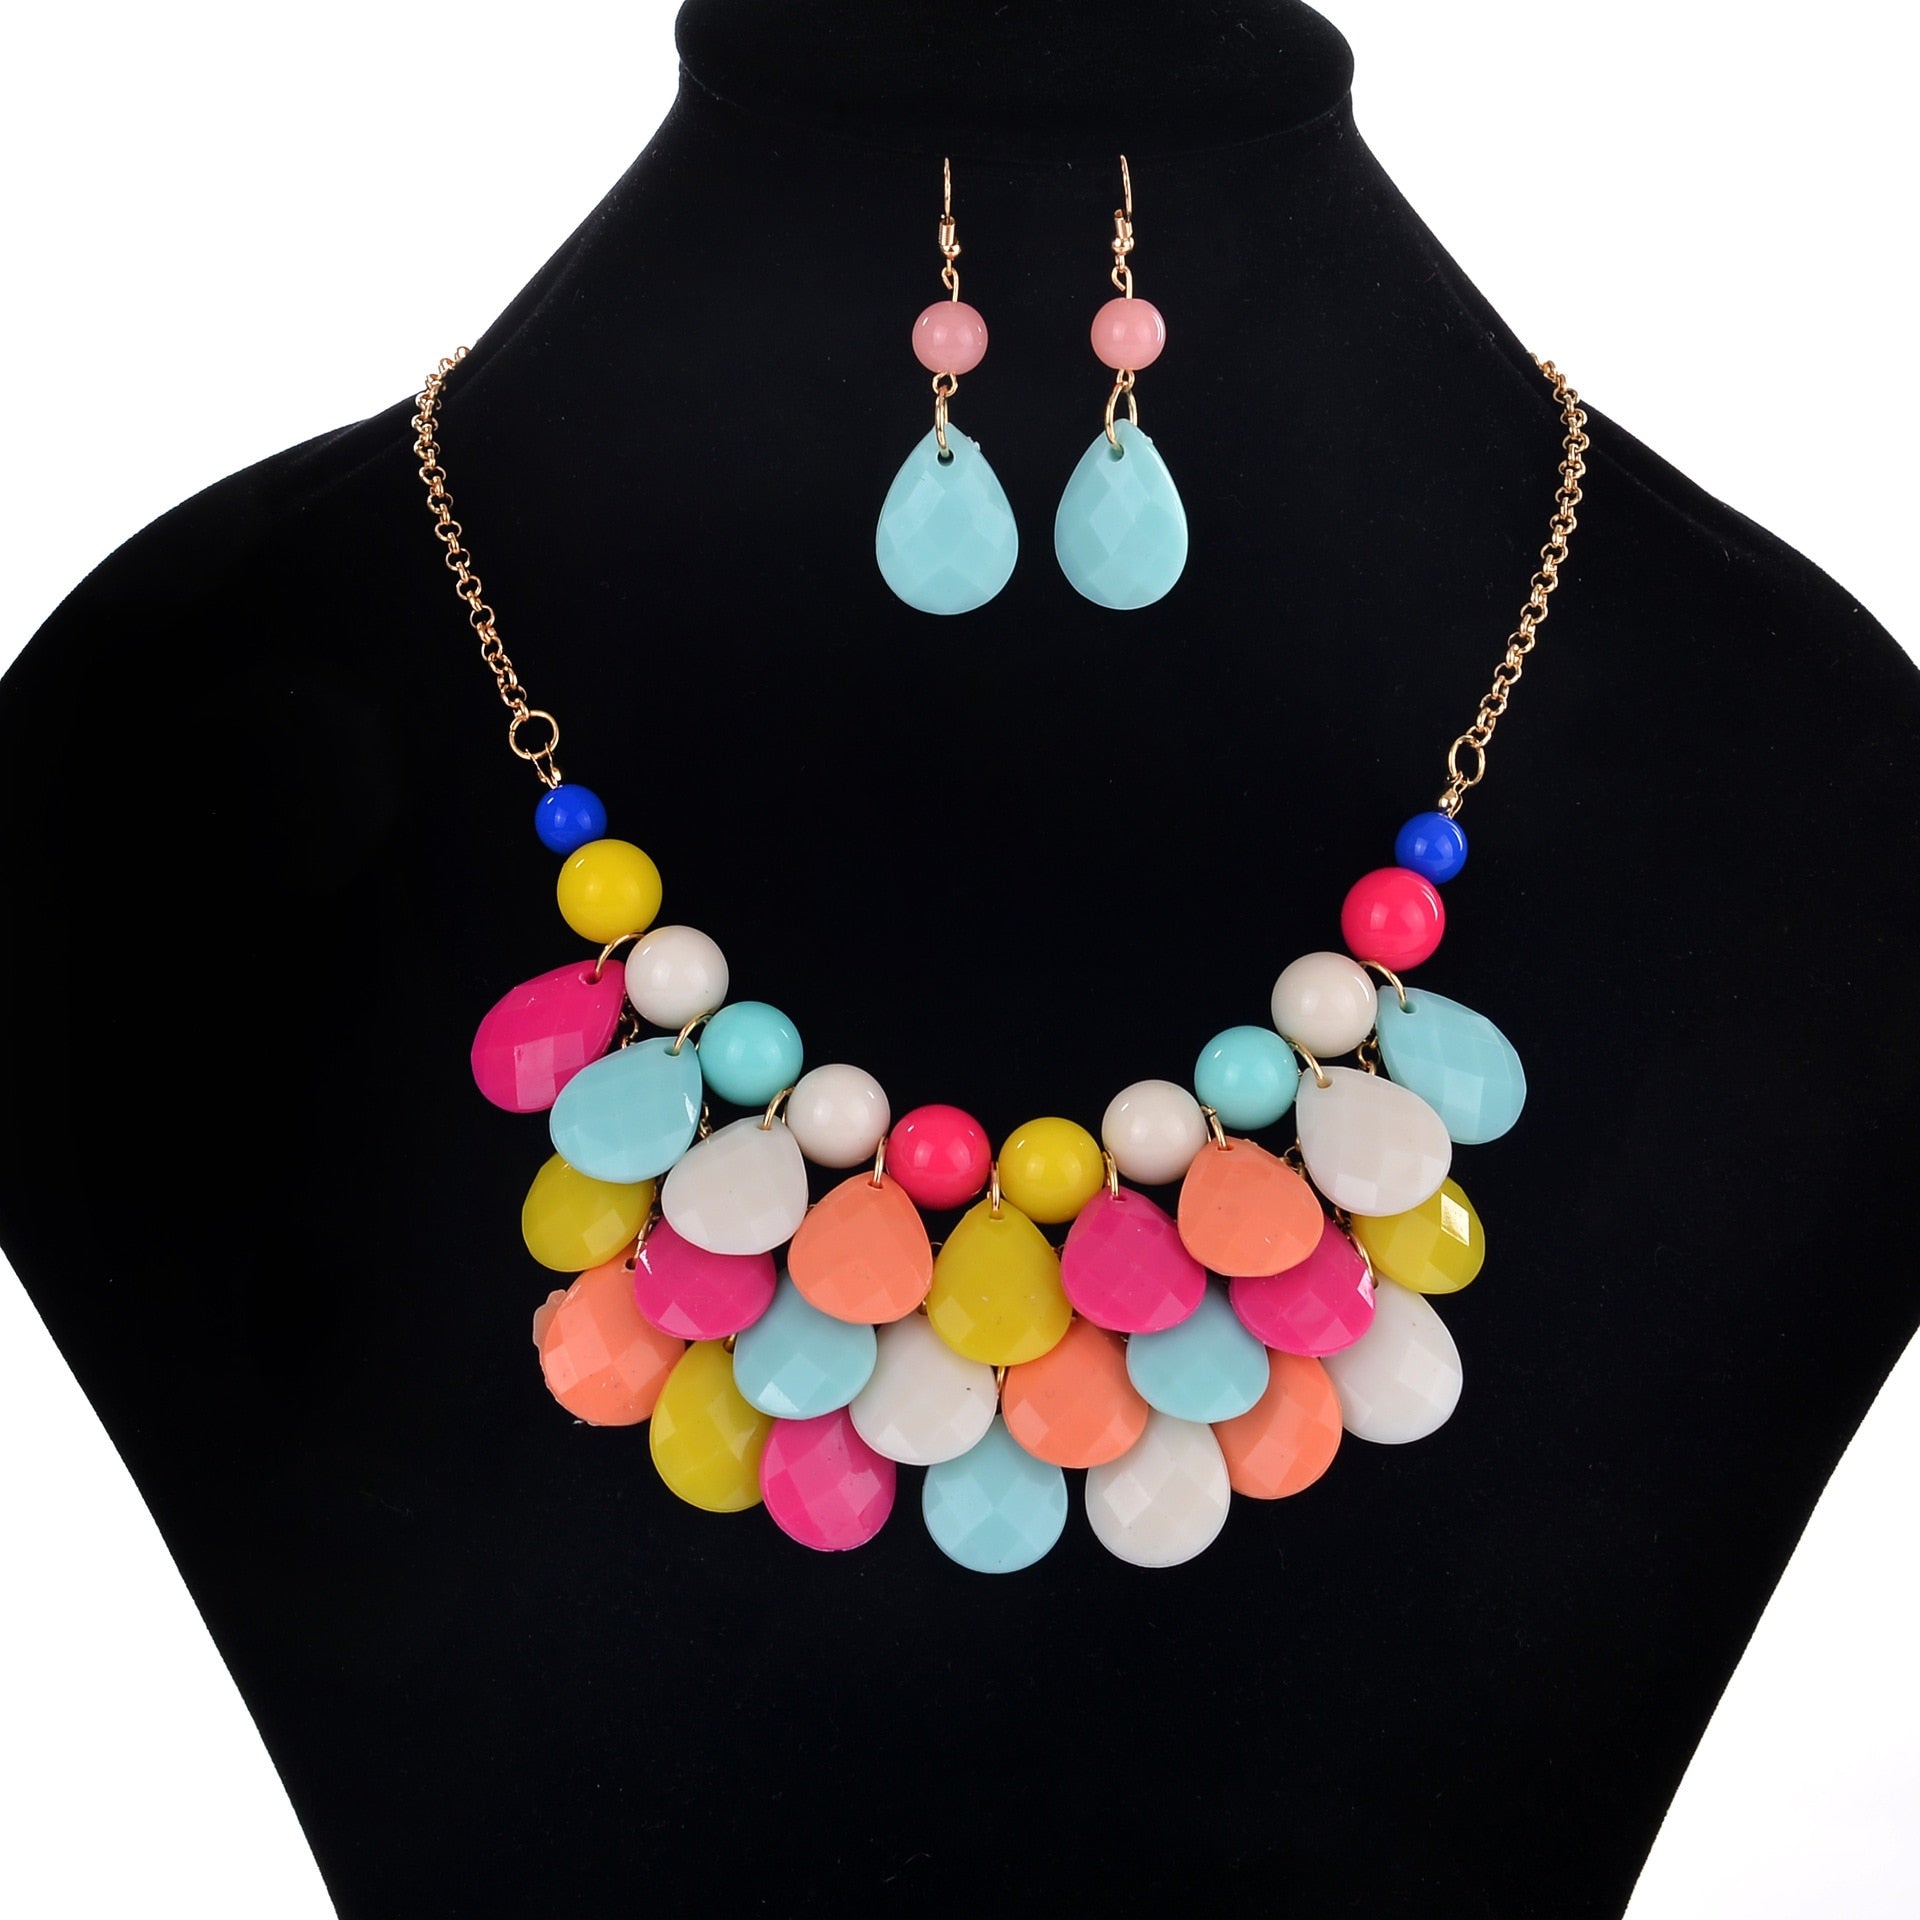 Korean Beach Water Drops Jewelry Sets Necklace Earrings Jewellery Sets For Women Earings Necklace Banquet Dinner Party Jewelry